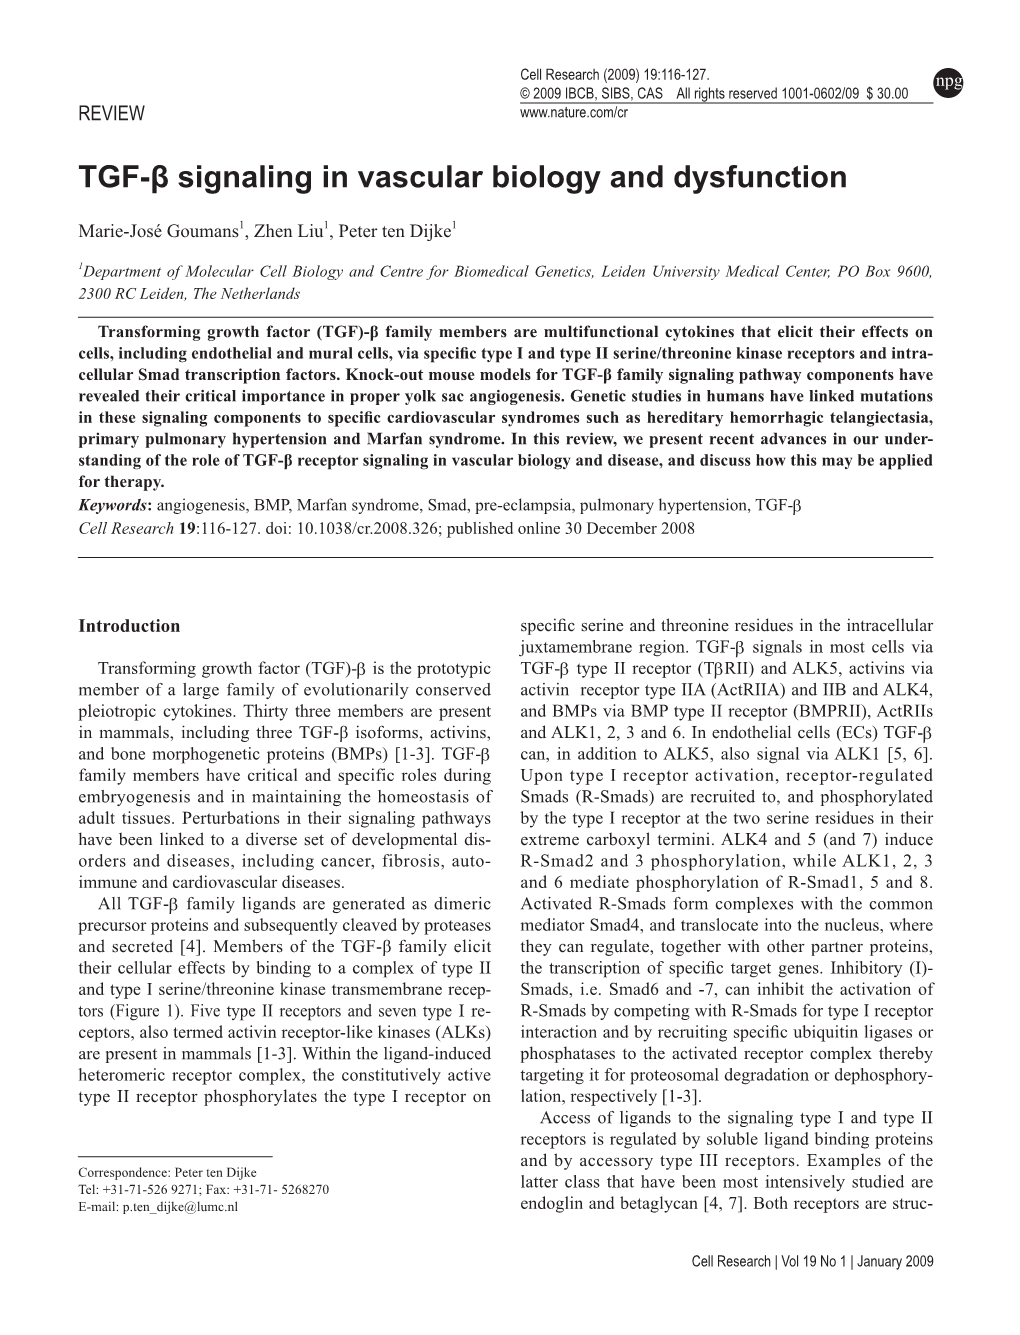 TGF-Β Signaling in Vascular Biology and Dysfunction